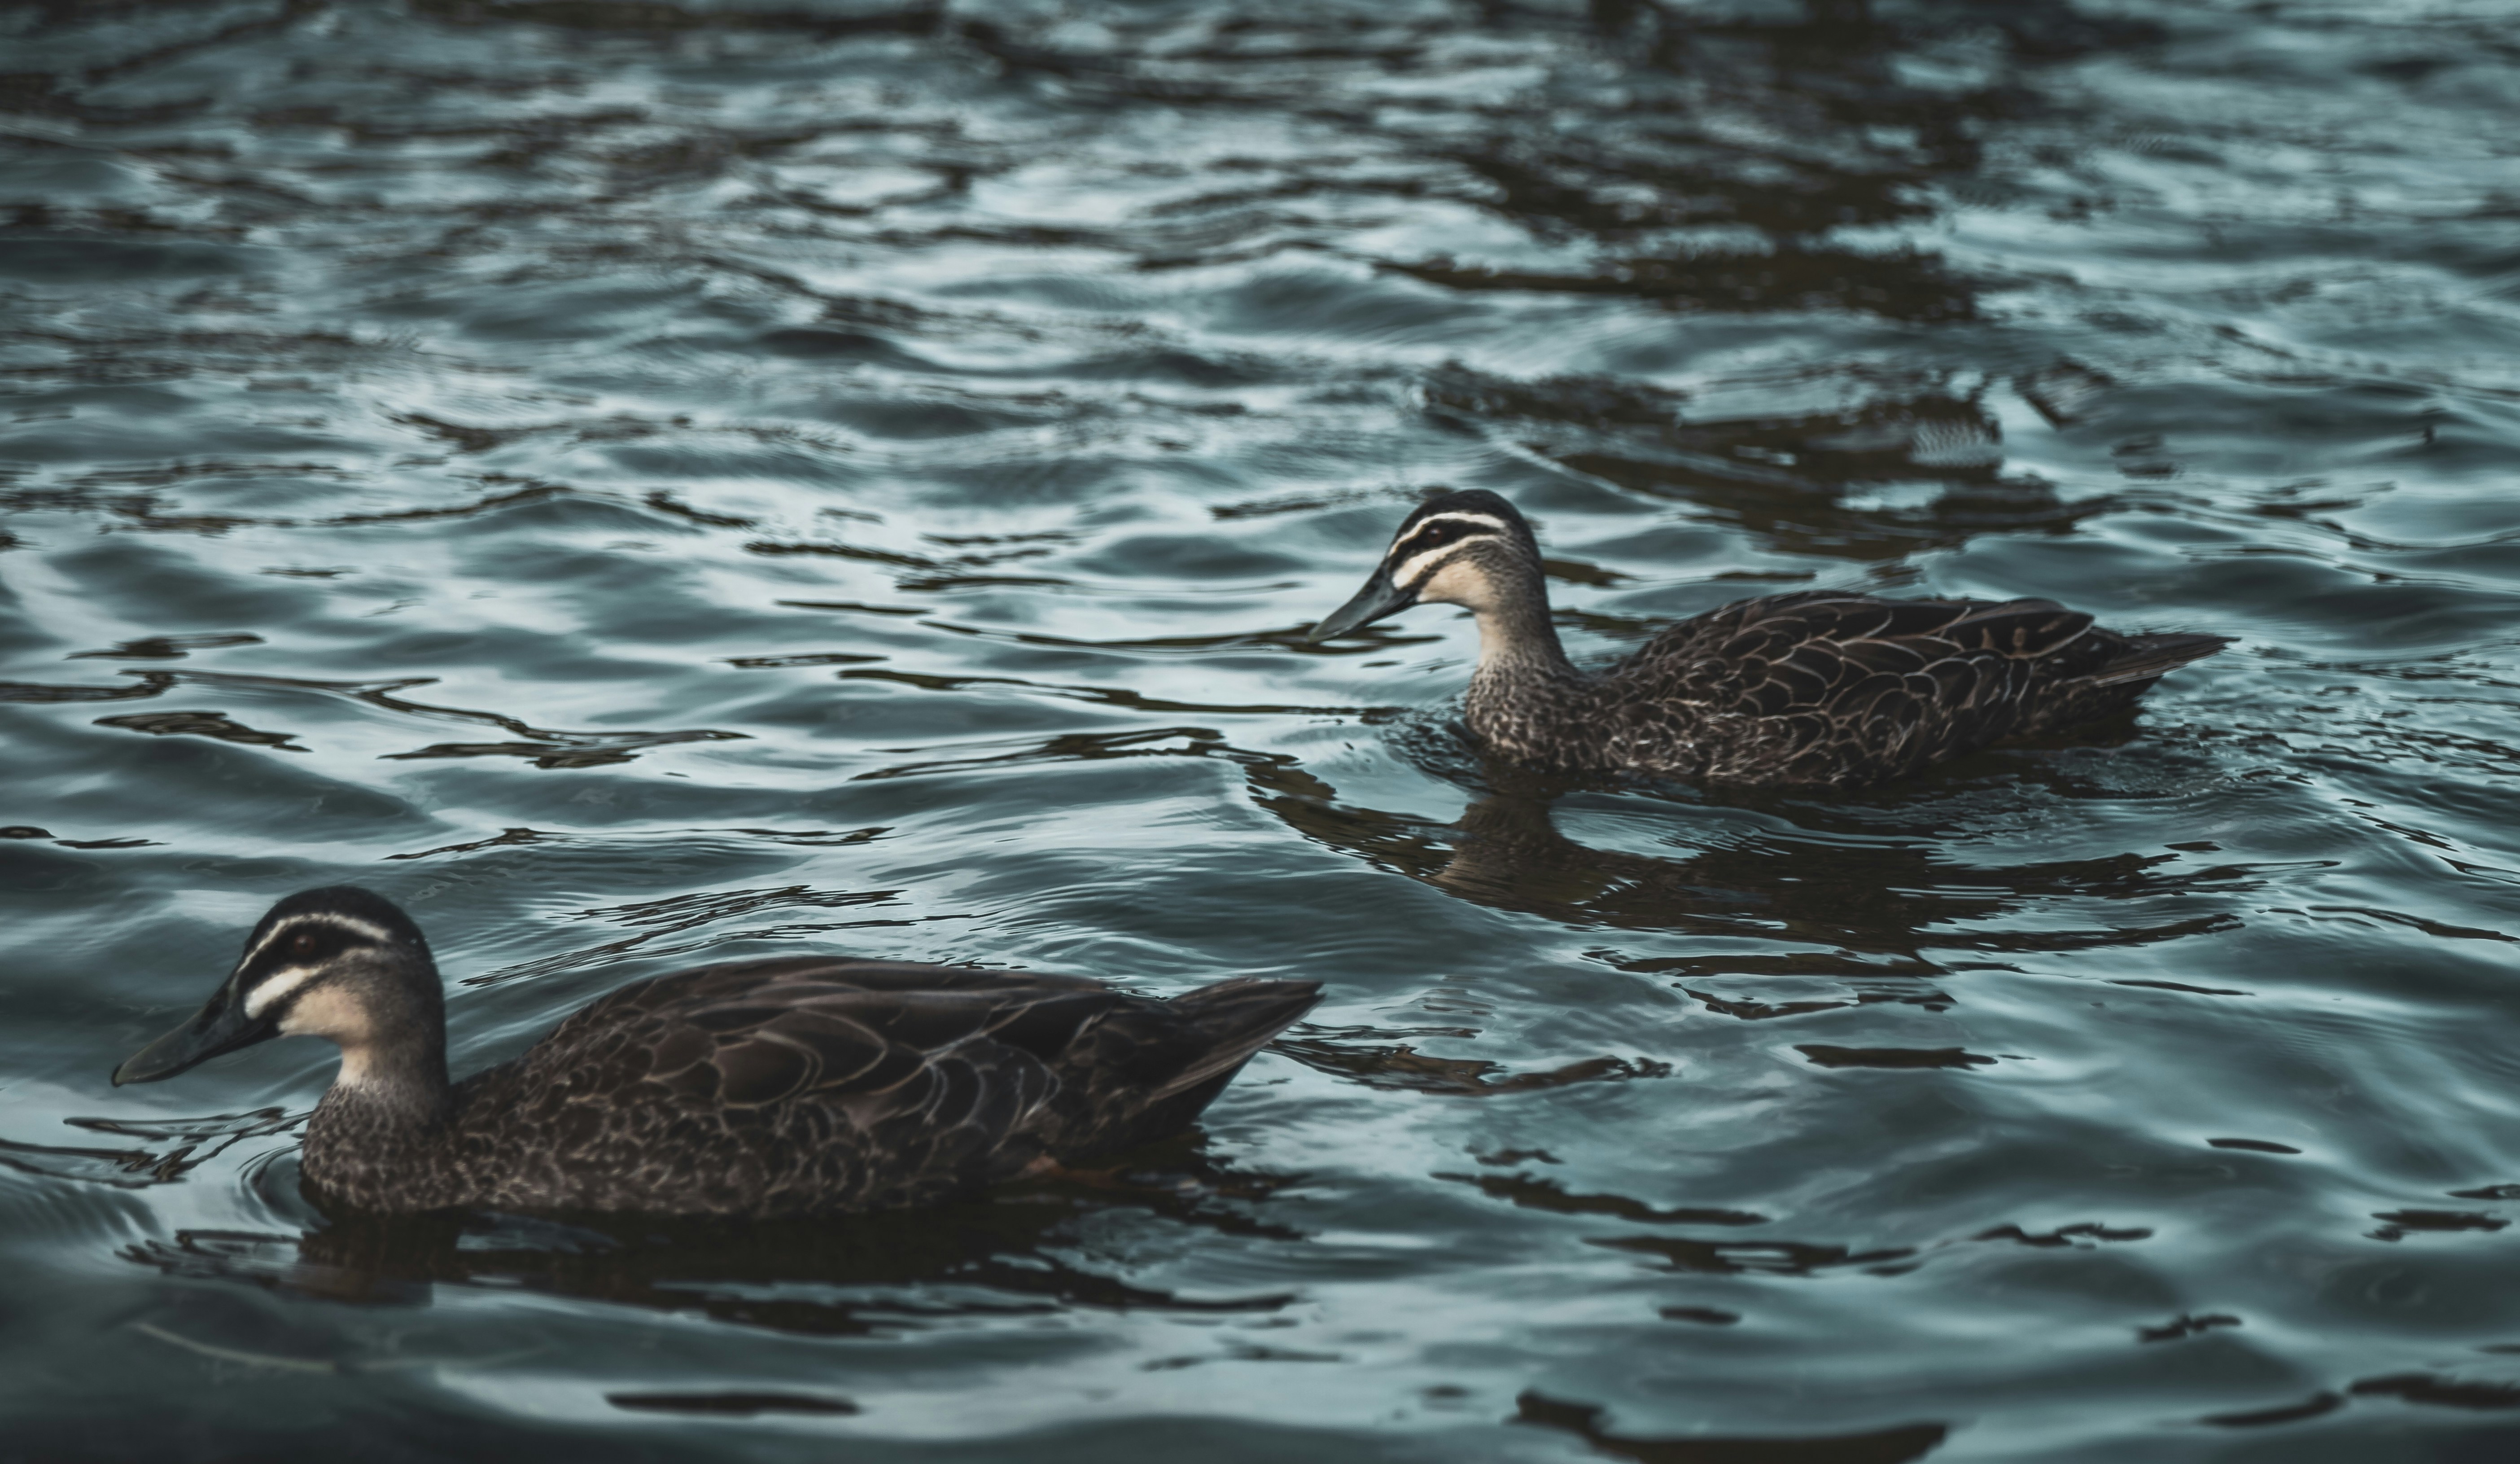 two black ducks on body of water